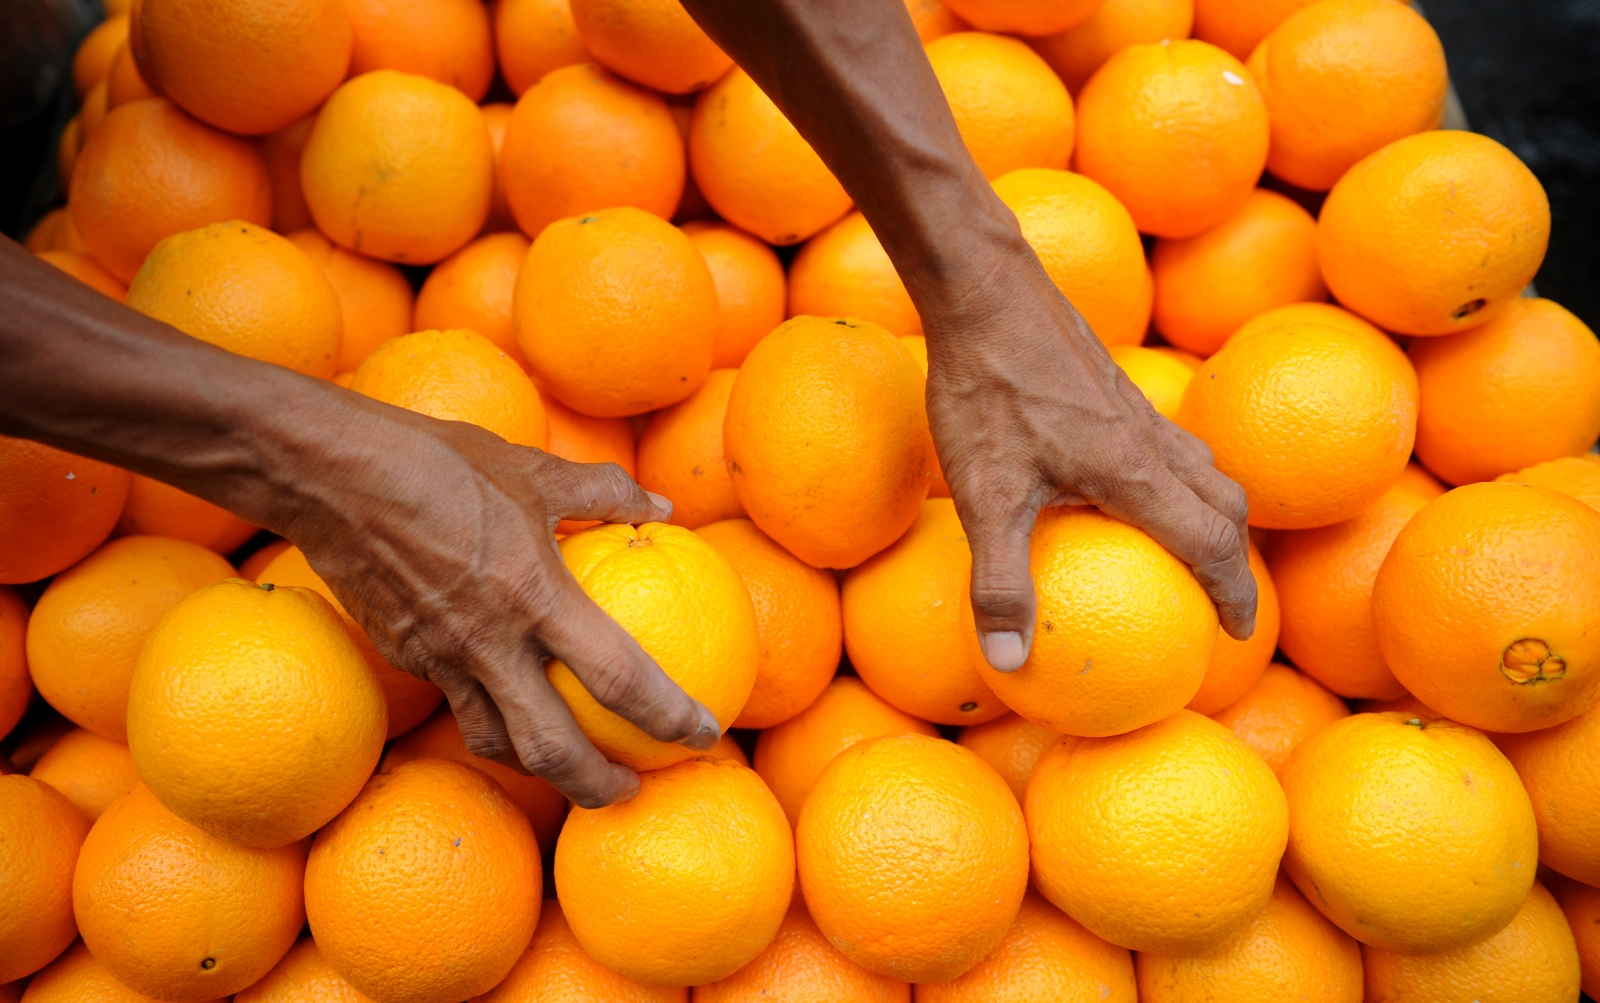 South Africa is the world's largest exporter of citrus fruit, but the EU farming sector is warning against a free-trade deal